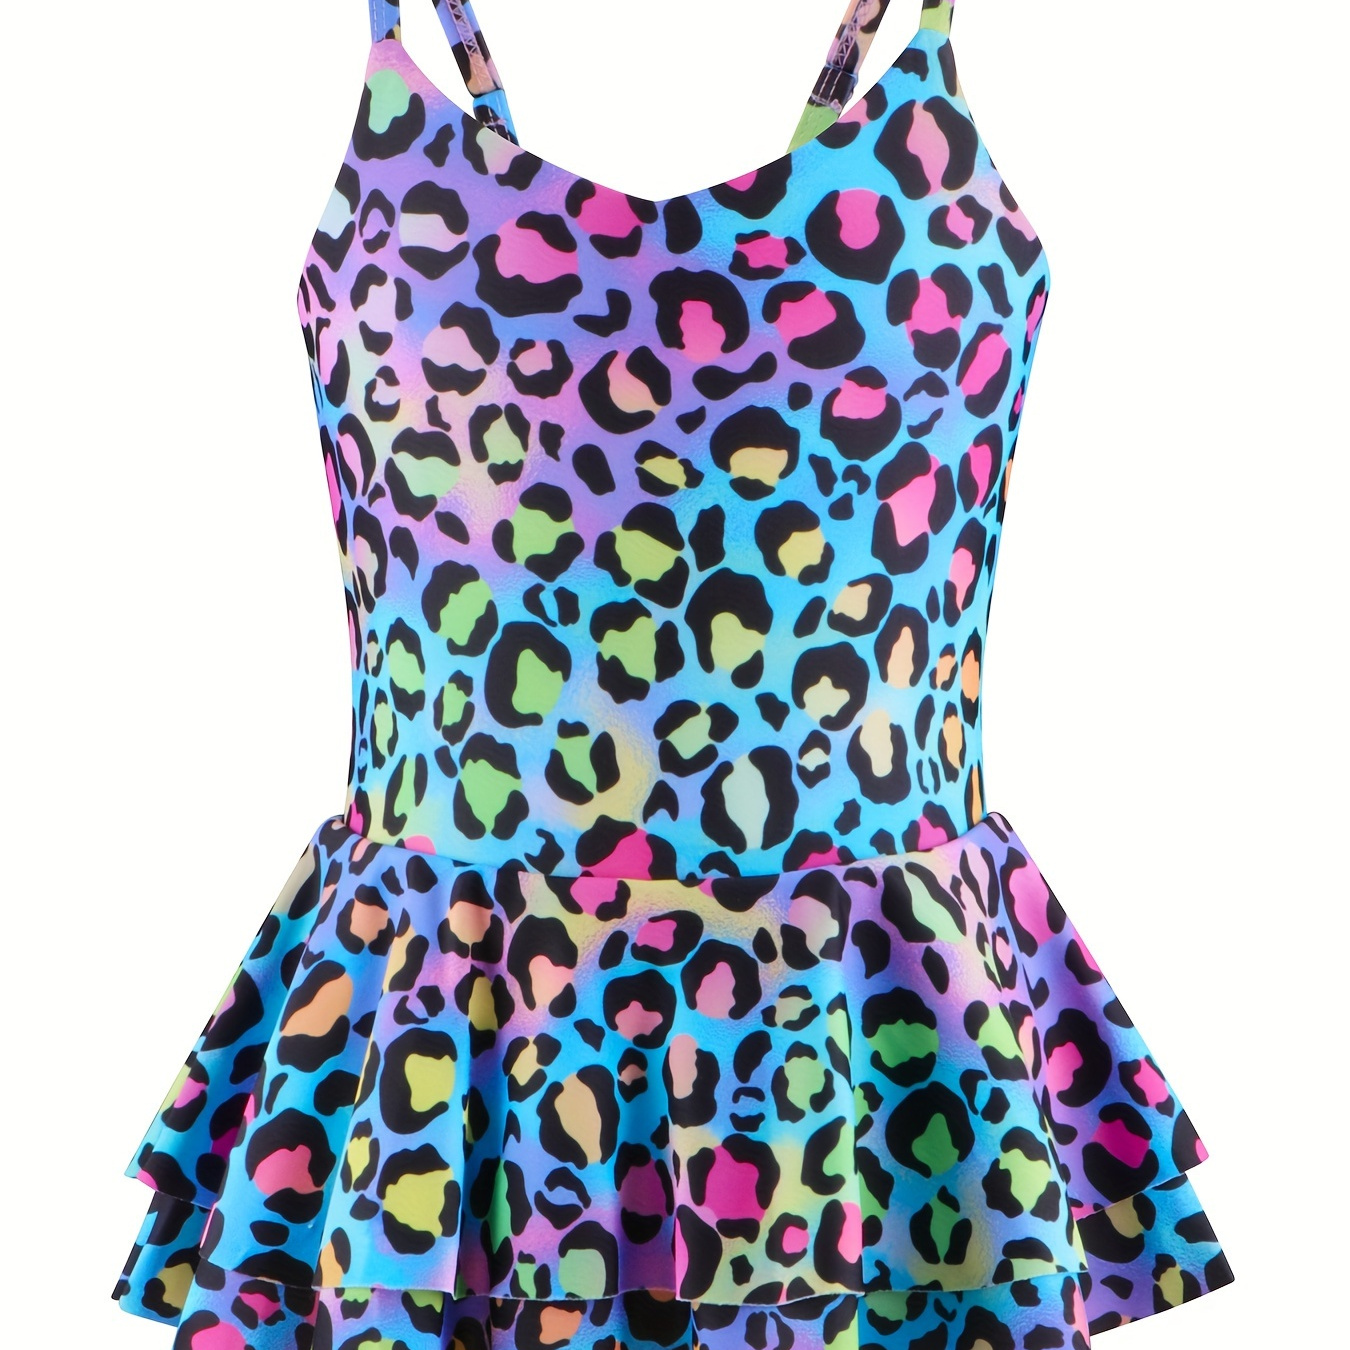 

Girls Casual Leopard Print Cami Swimwear Cute Stretchy Bathing Suit For Summer